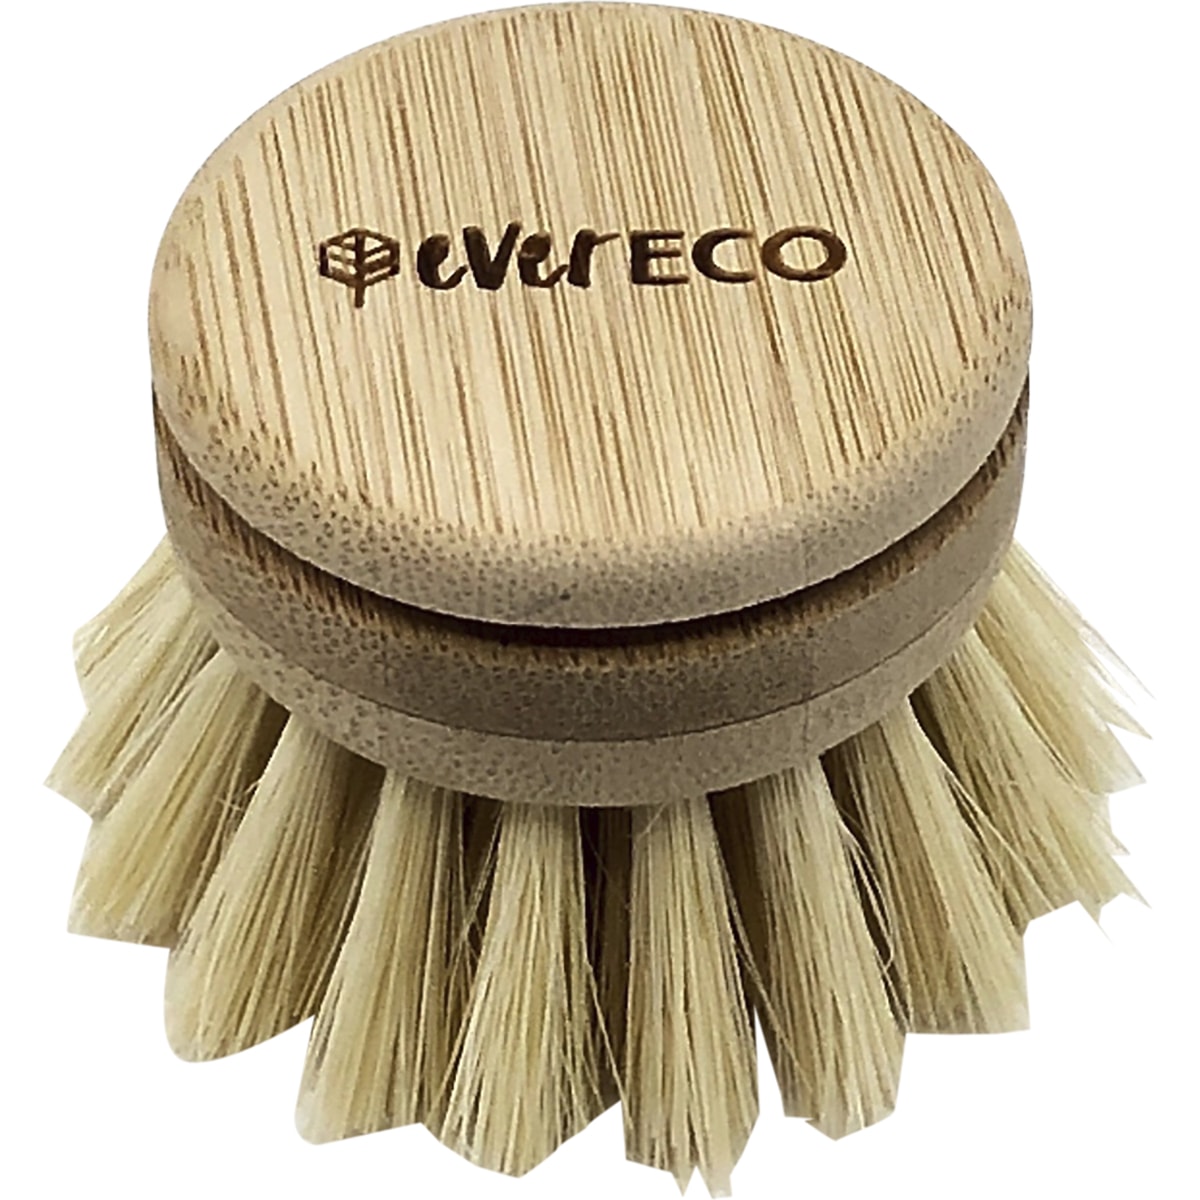 Ever Eco - Bamboo Dish Brush Replacement Head